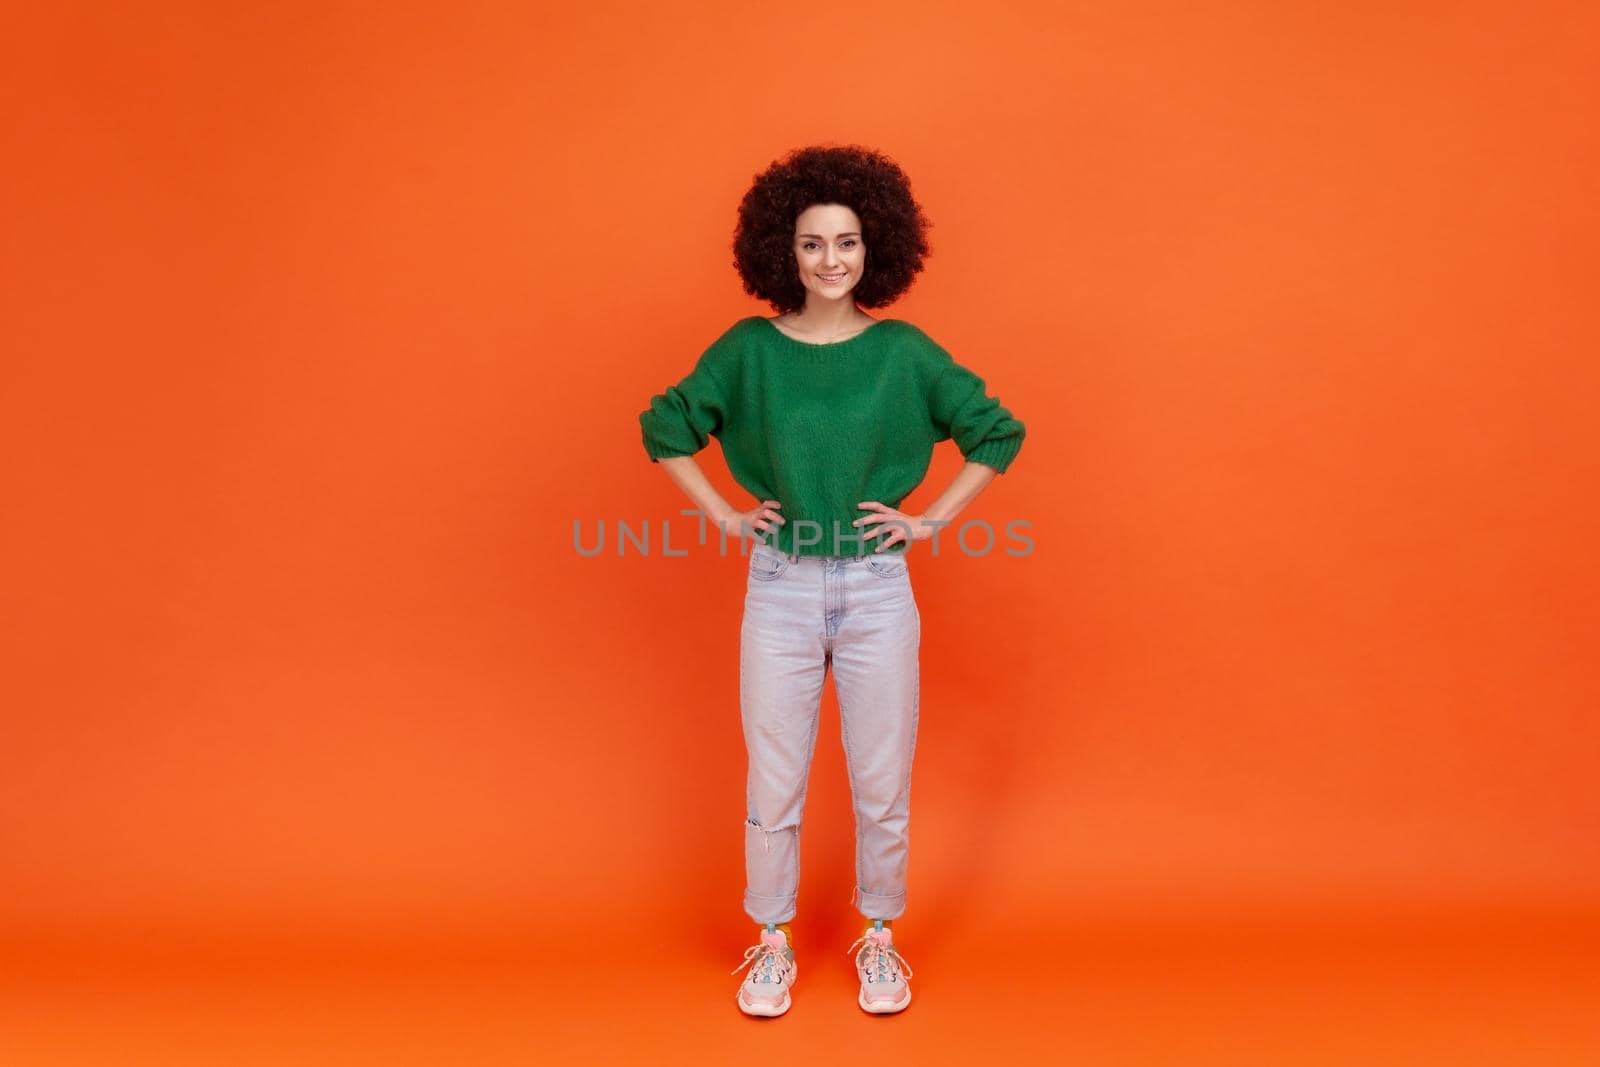 Full length portrait of positive woman with Afro hairstyle wearing green casual style sweater standing with hands on hips and toothy smile. by Khosro1